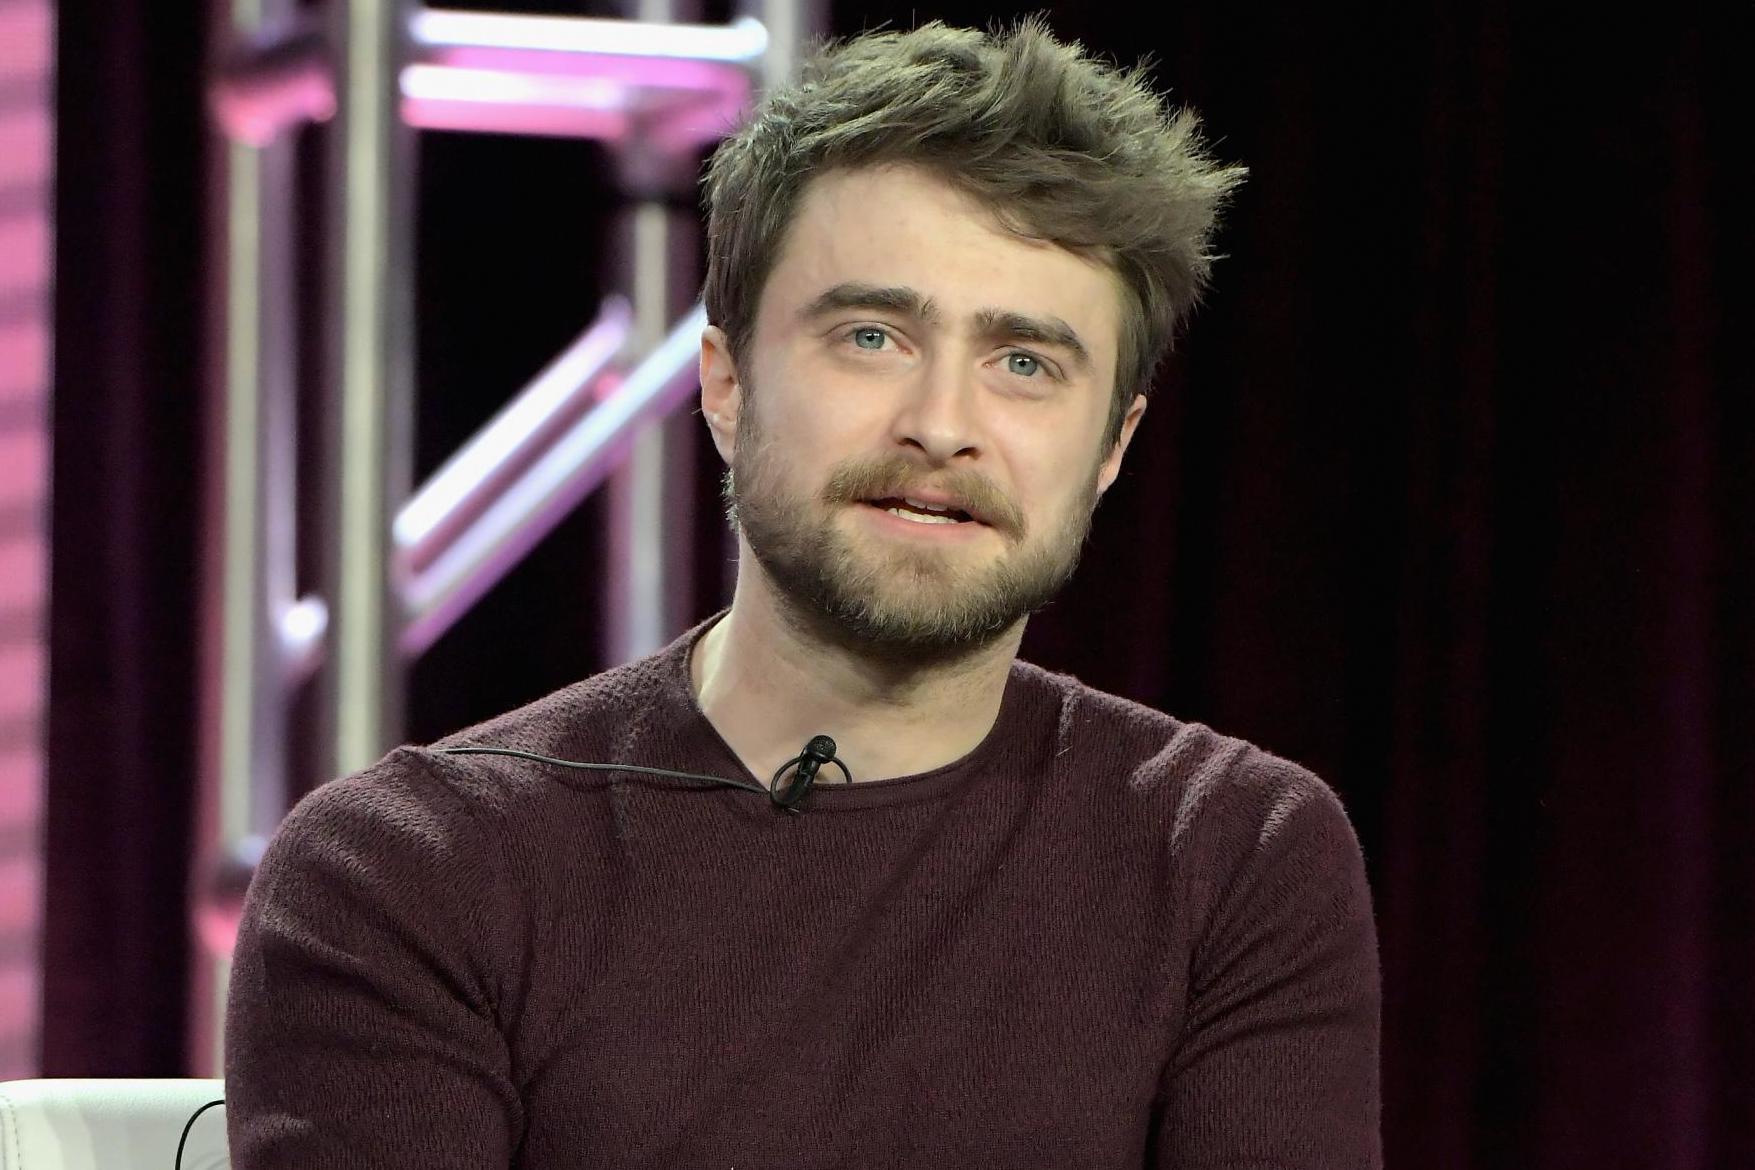 Daniel Radcliffe is 'sure' Harry Potter films will get a